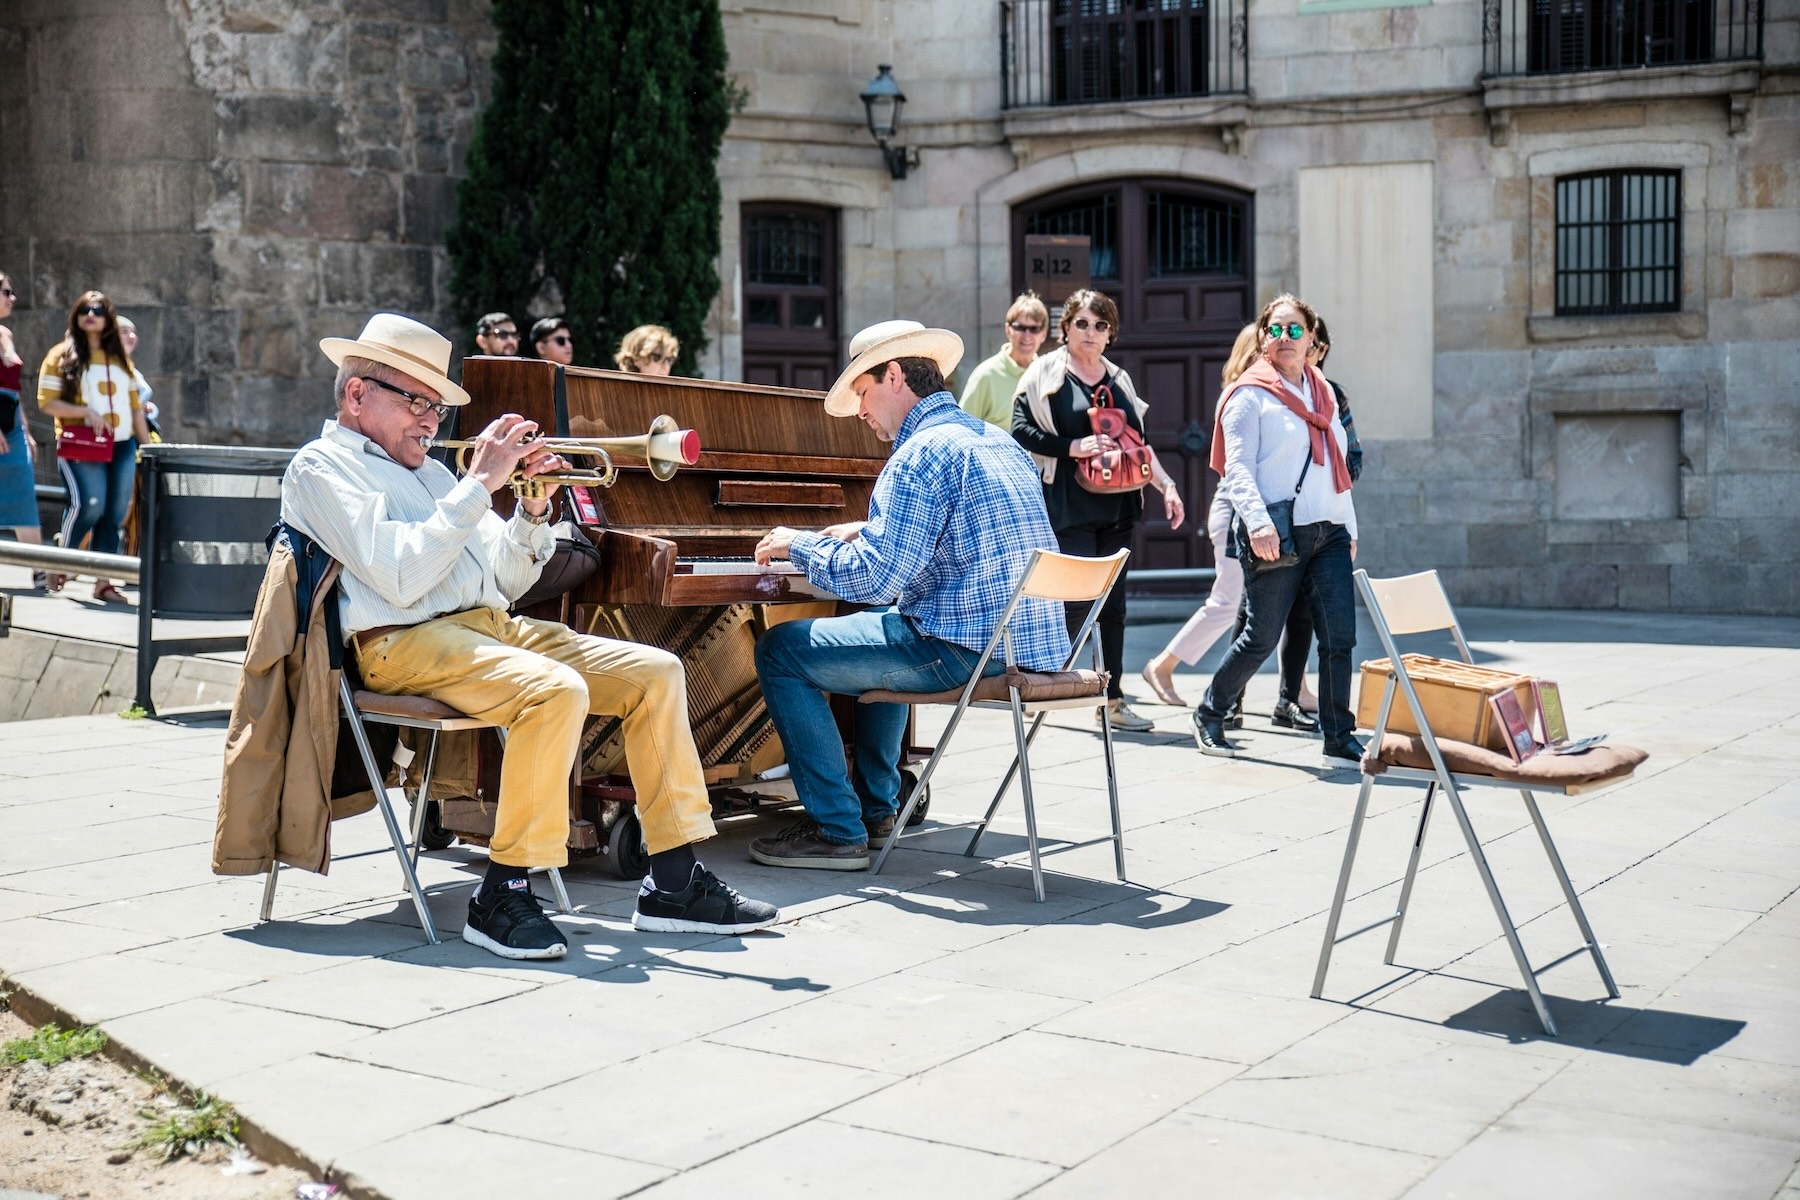 Musicians perform on the street in Spain for passing tourists